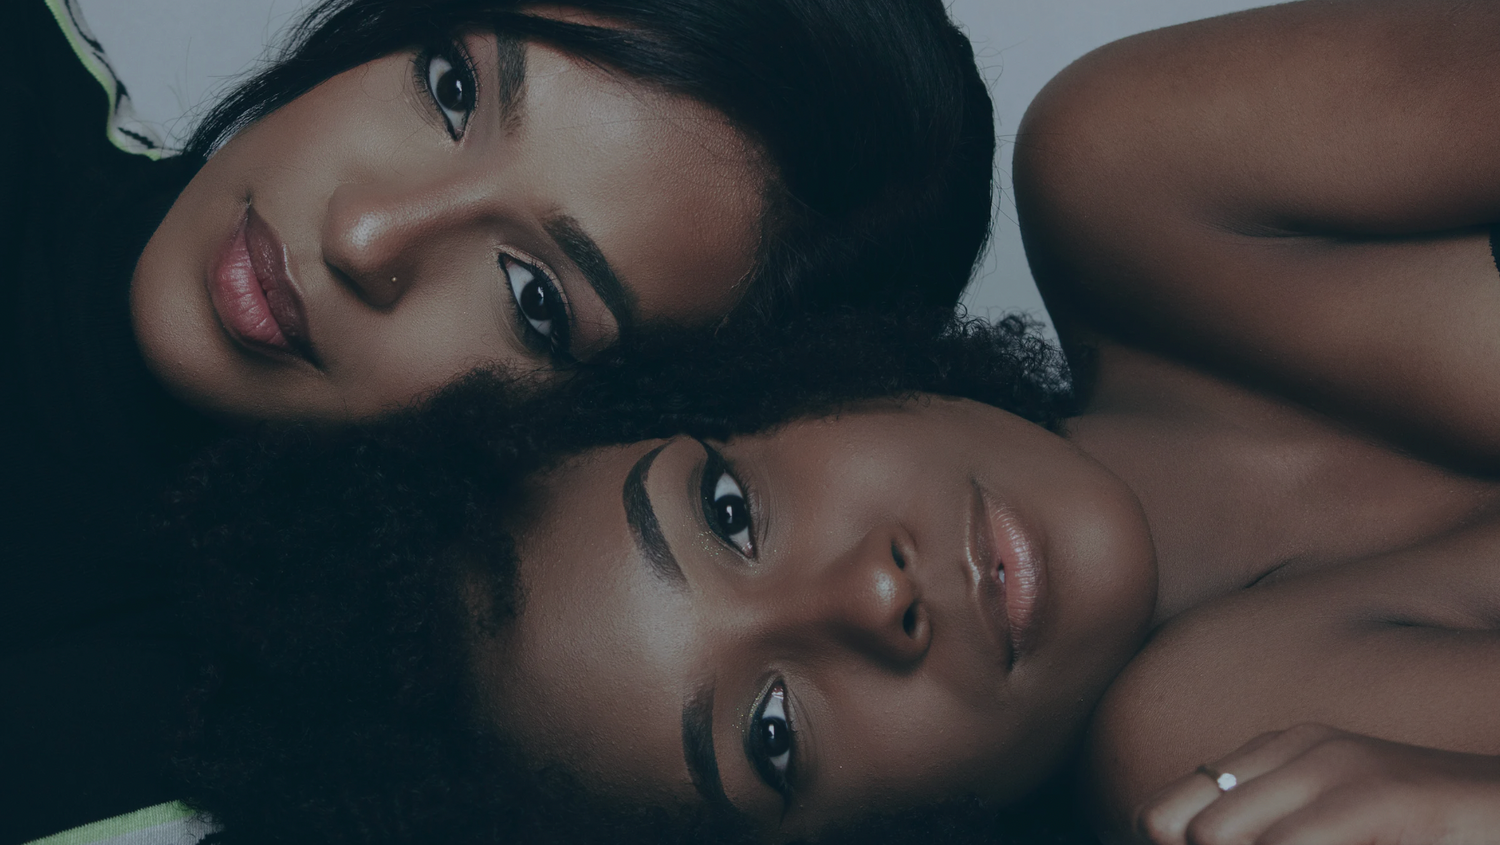 DID YOU KNOW?   70% OF BLACK WOMEN SAY SKINCARE PRODUCTS DON'T WORK FOR THEM